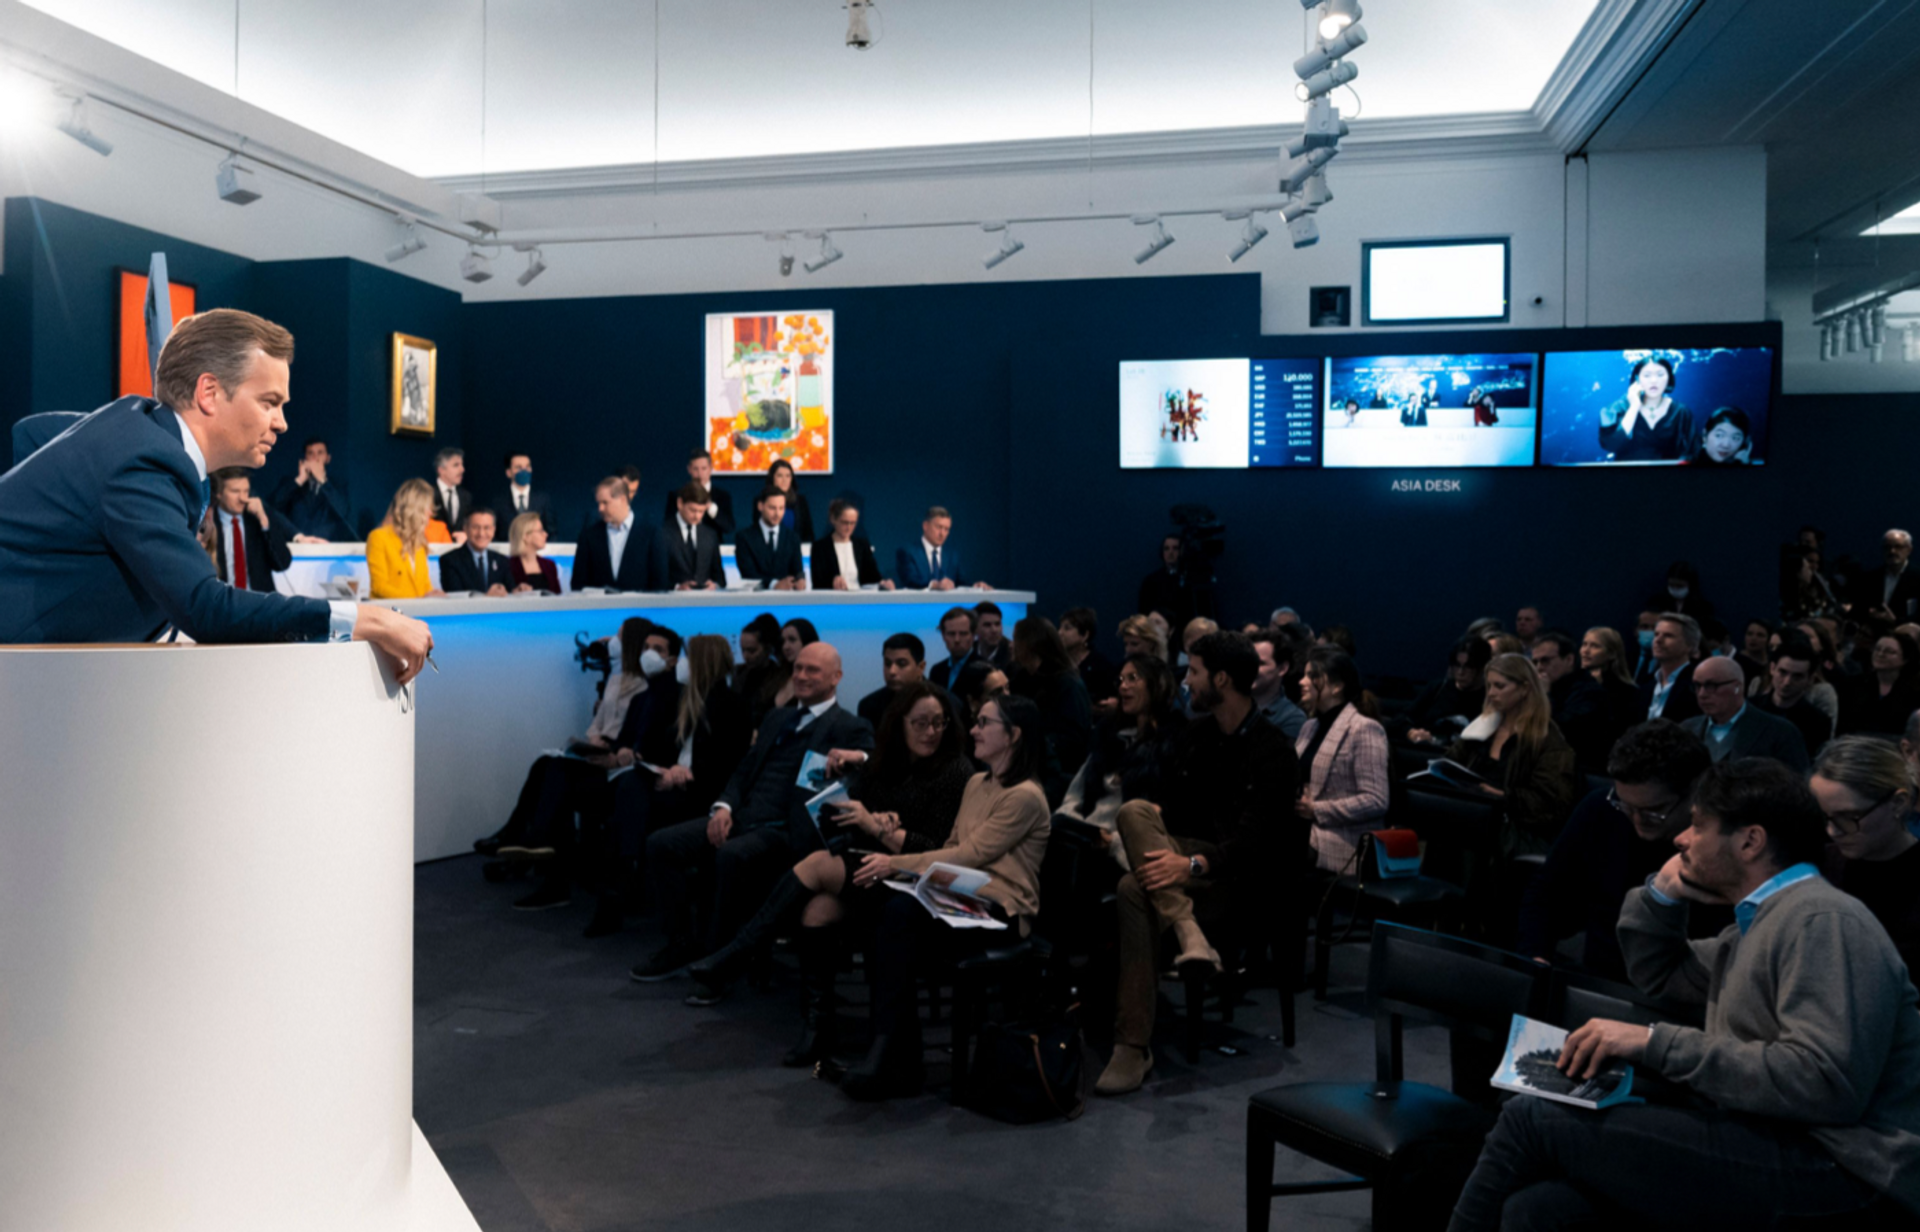 According to the sixth edition of the Art Basel and UBS Global Art Market Report, published this week, sales by dealers and auction houses reached an estimated $65.1 billion in 2021, up 29% on 2020 and even nudging past the $64.1 billion made in 2019 Courtesy of Sotheby's